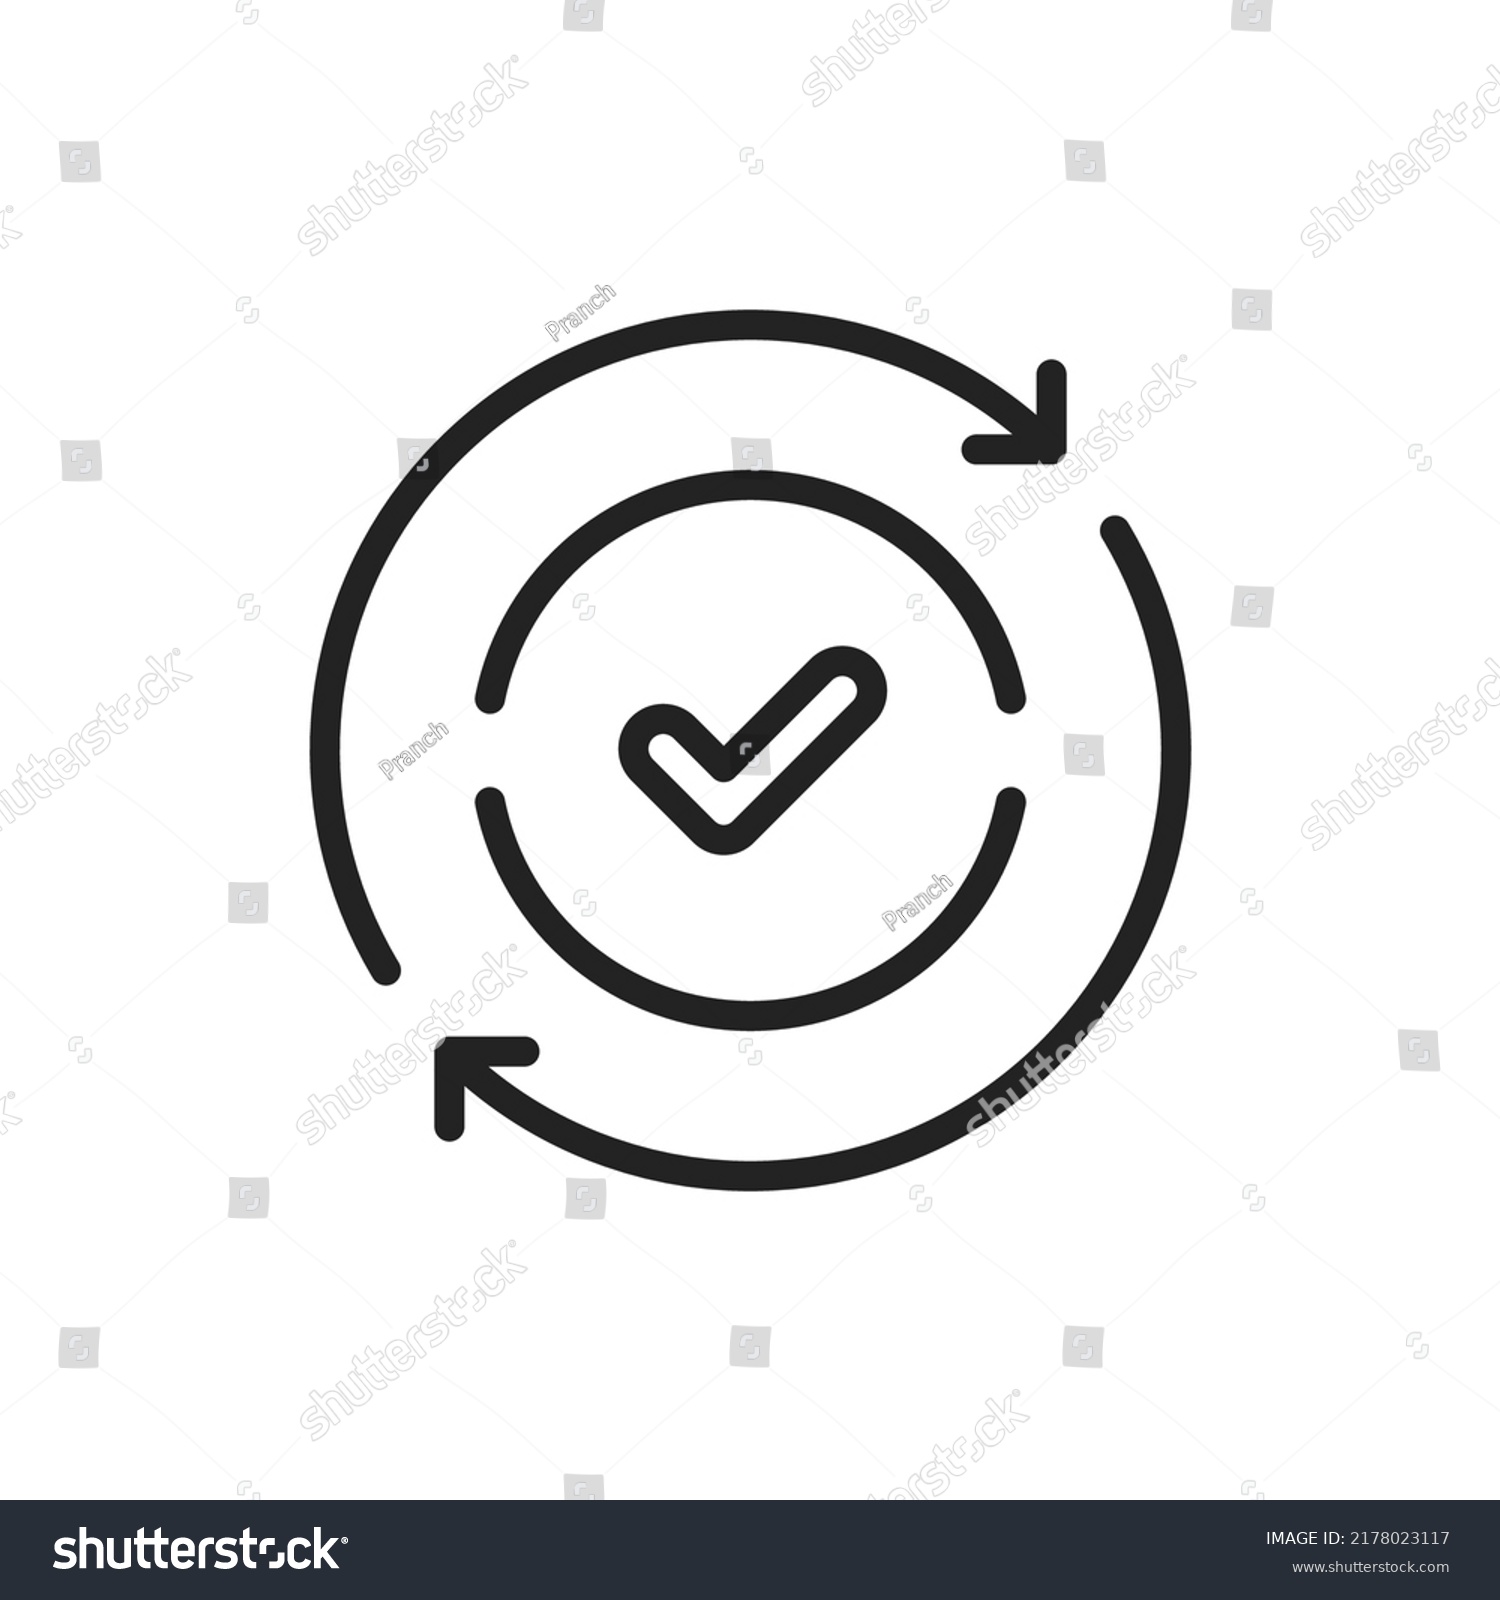 round convenient icon like easy pay or update. concept of replace or swap symbol and quality control. linear trend modern synchronize logotype graphic stroke art design web element isolated on white #2178023117